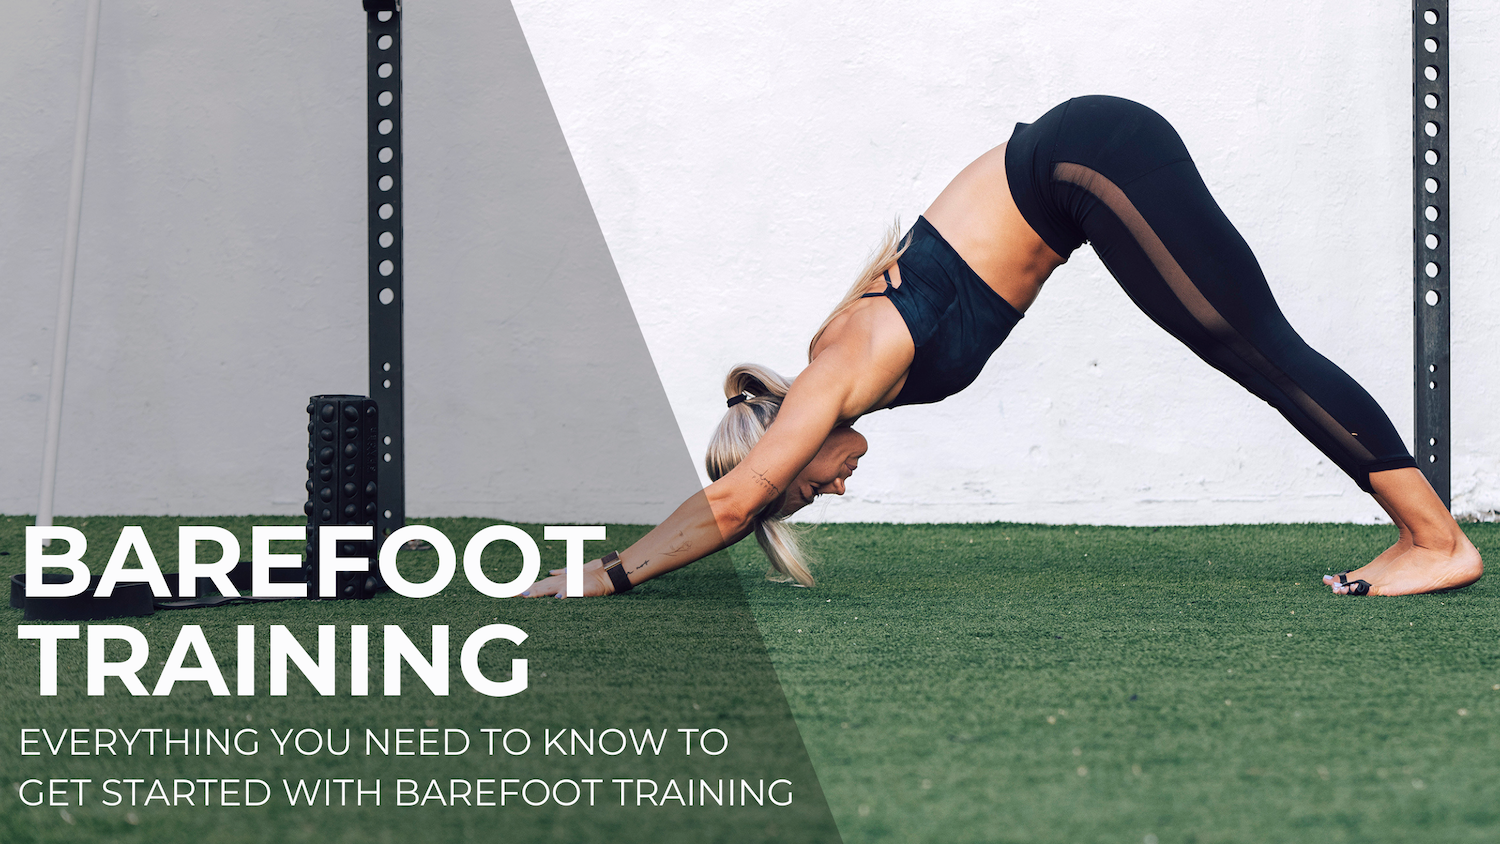 Everything You Need to Know to Get Started With Barefoot Training